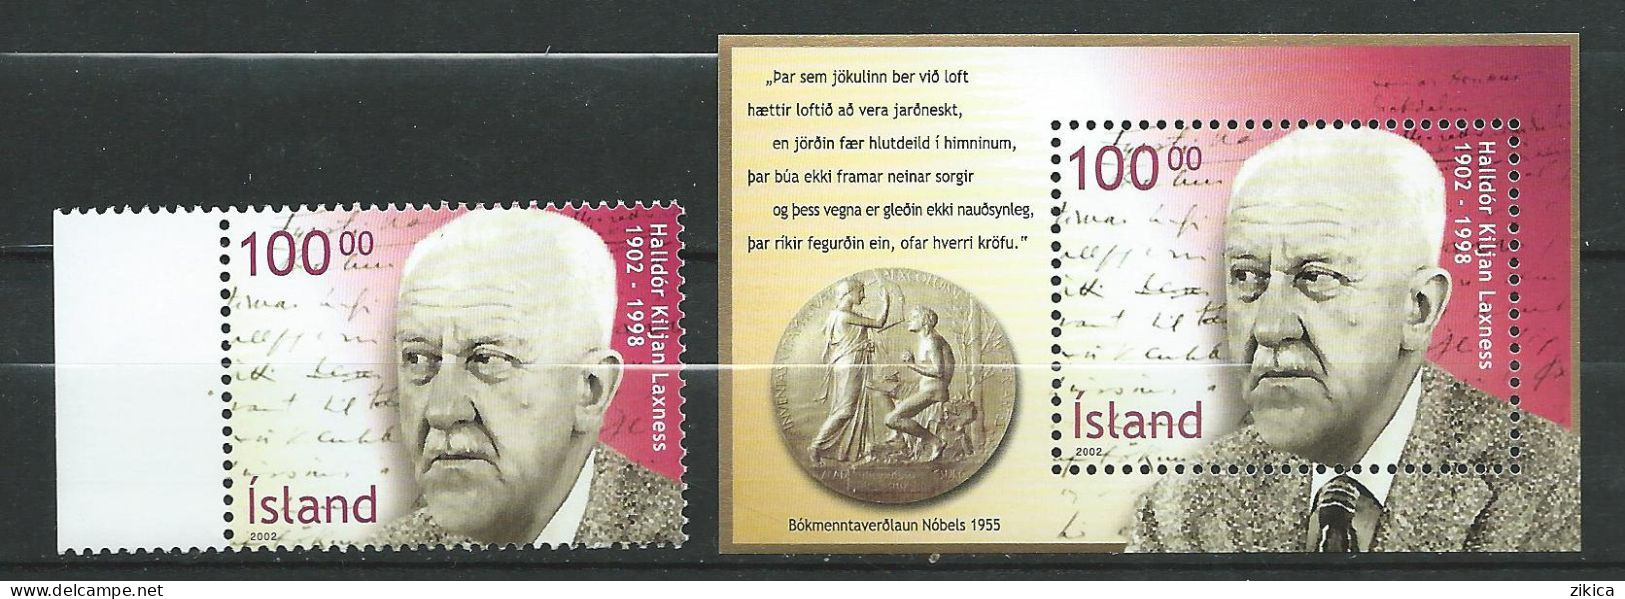 Iceland 2002 The 100th Ann. Of The Birth Of Nobel Prize Winner Halldor Laxness.Block And Stamp. MNH** - Nuovi